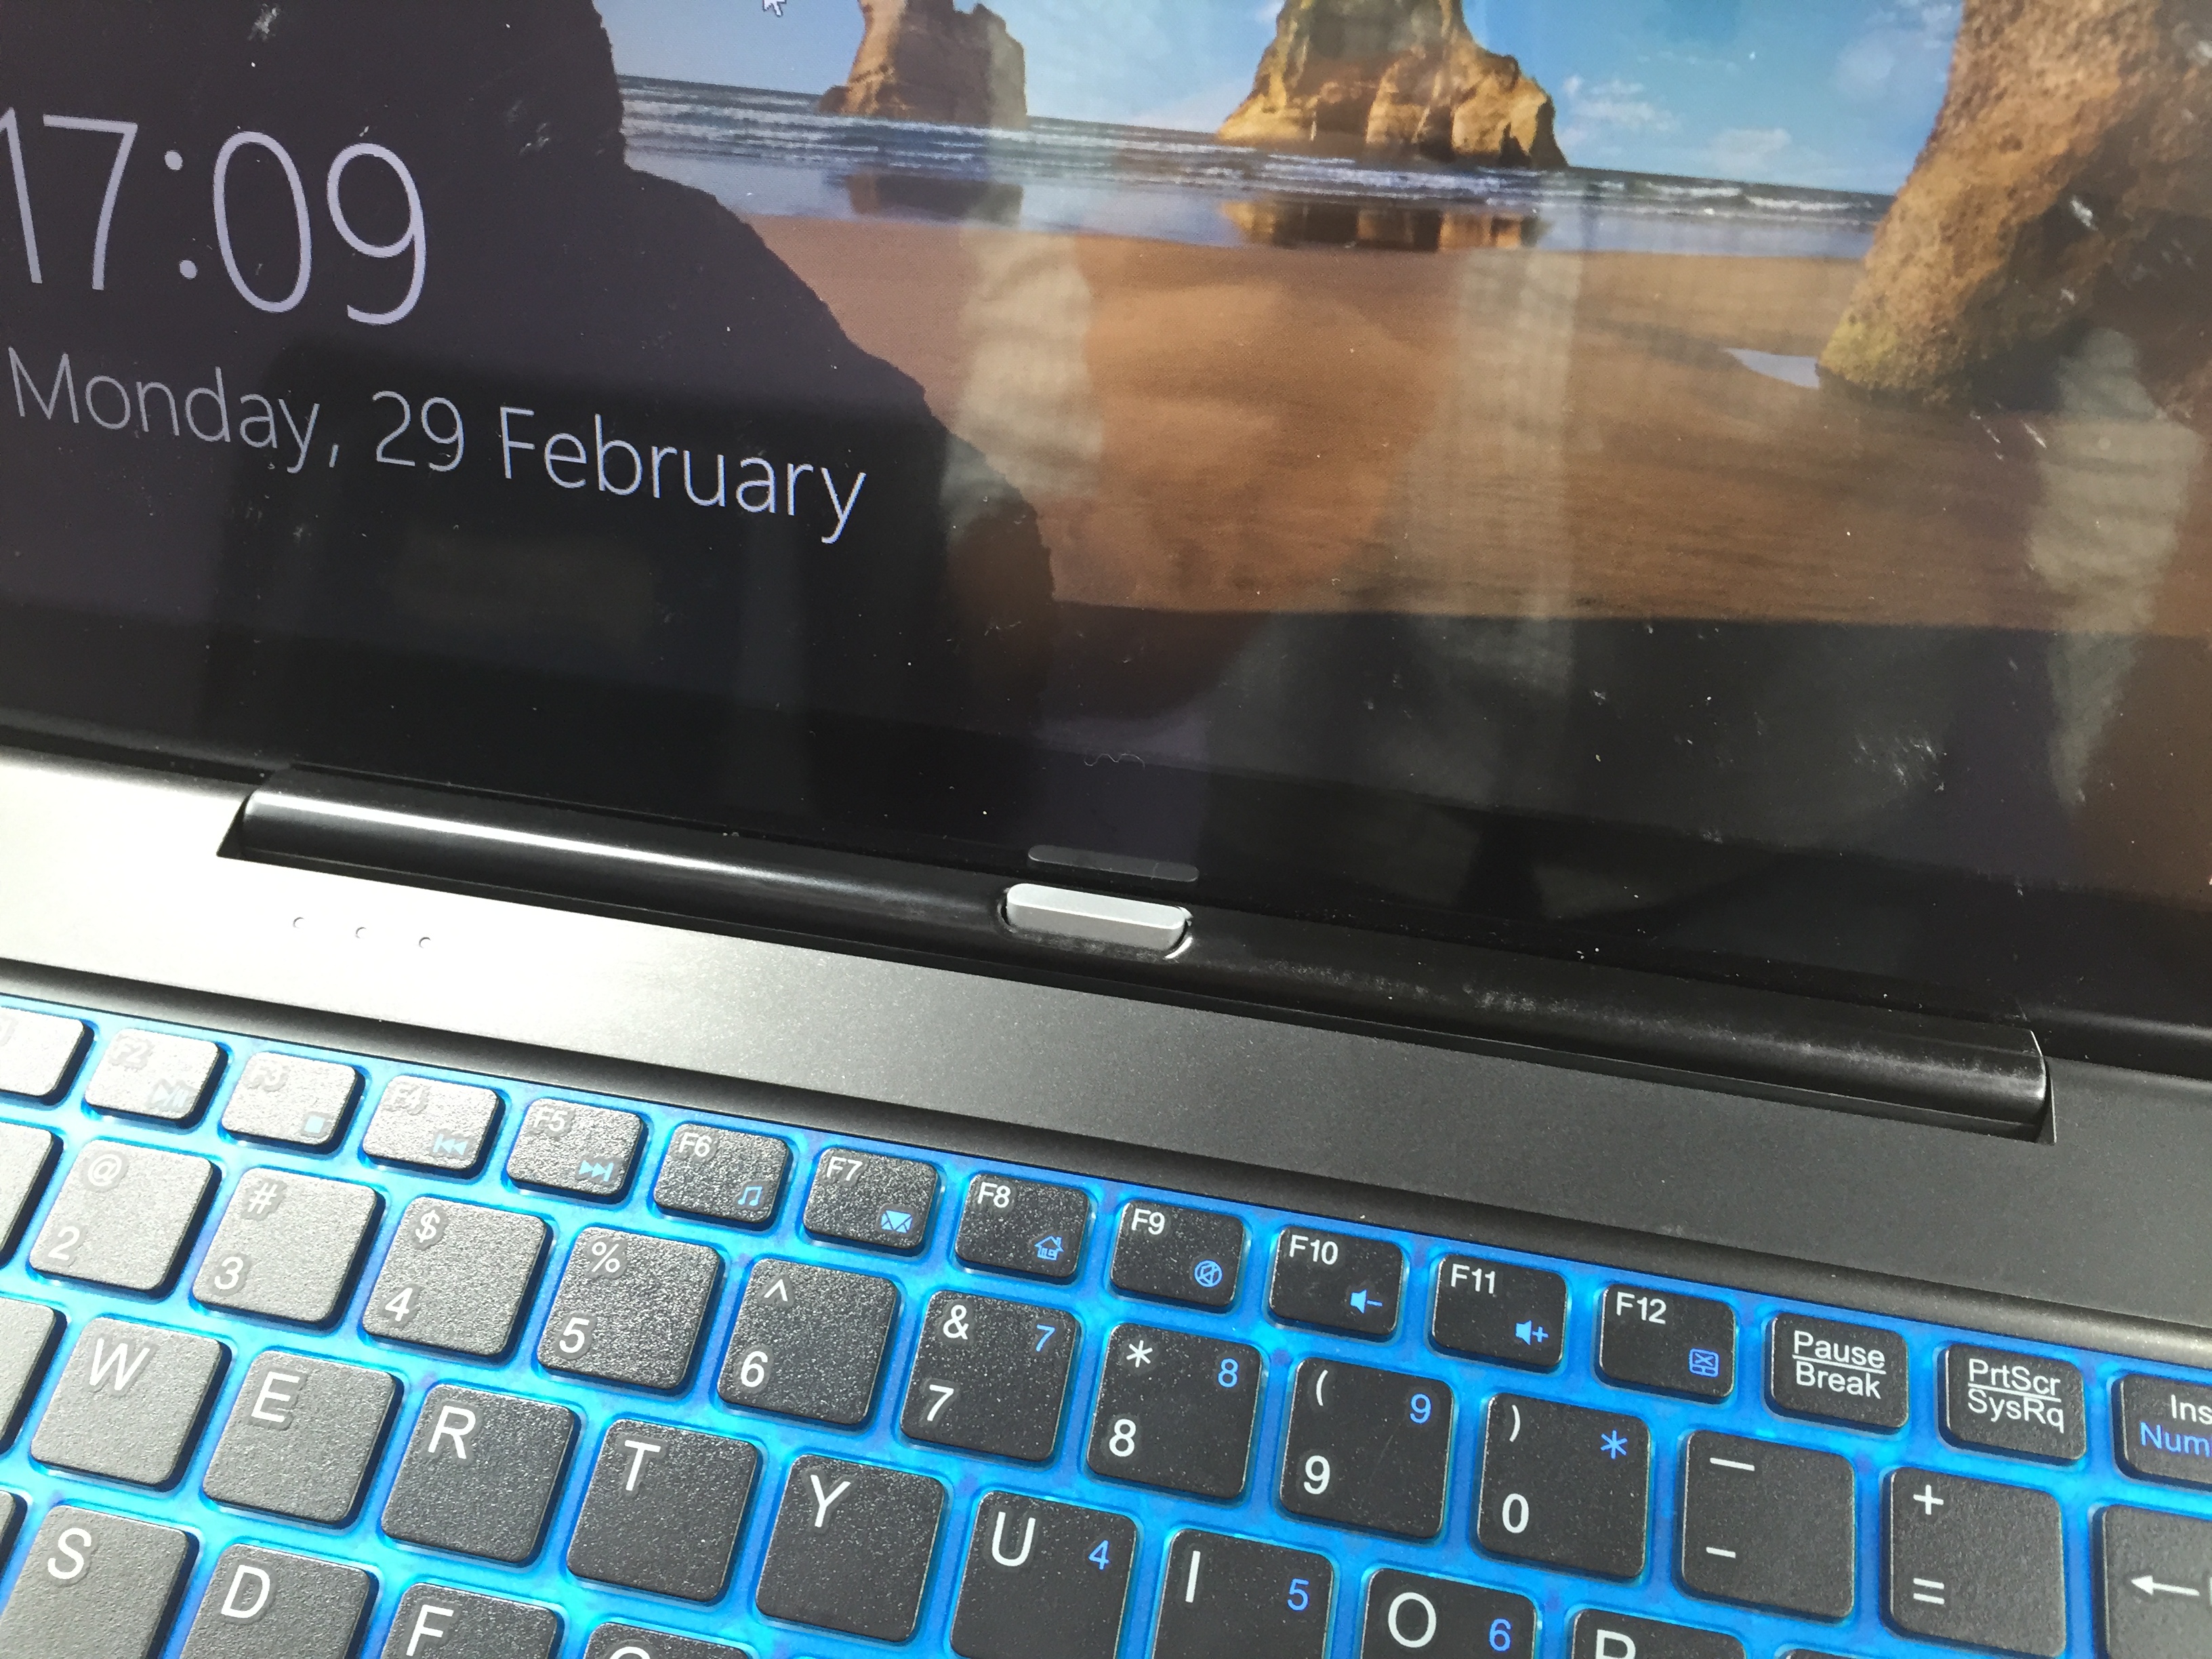 Introducing the Powerful, Affordable Nextbook Flexx 2-in-1 Windows